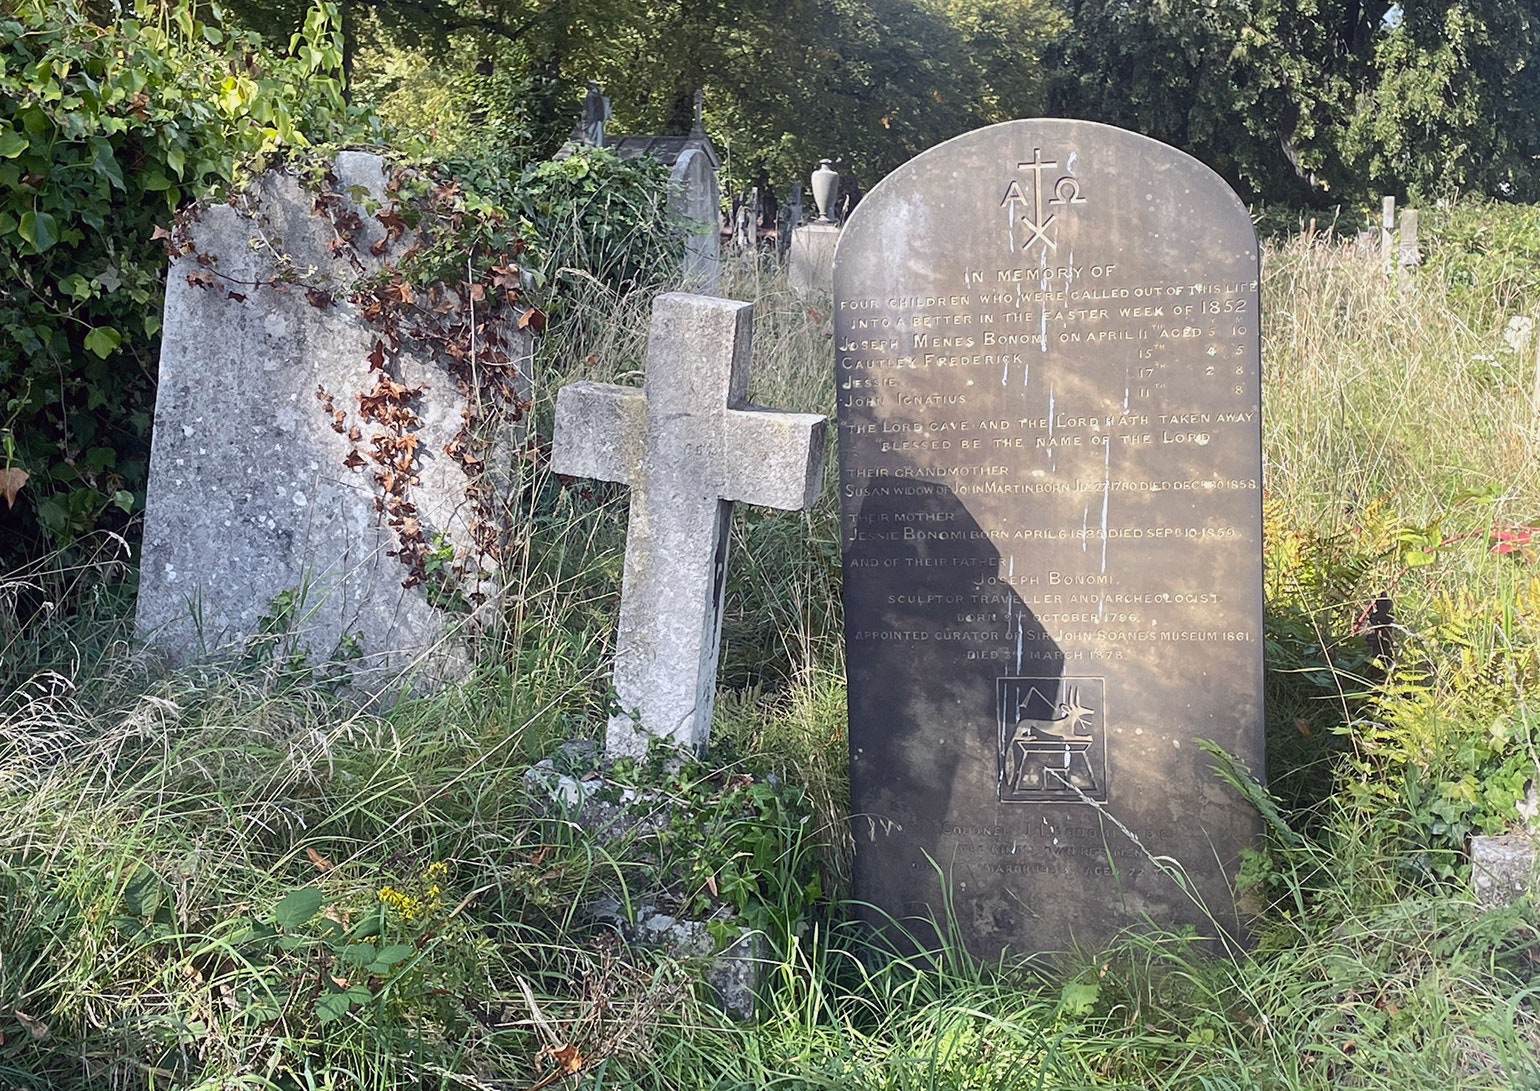 Egyptologist Joseph Bonomis own grave is austere a simple headstone lists family names and his positions. An allusion to...